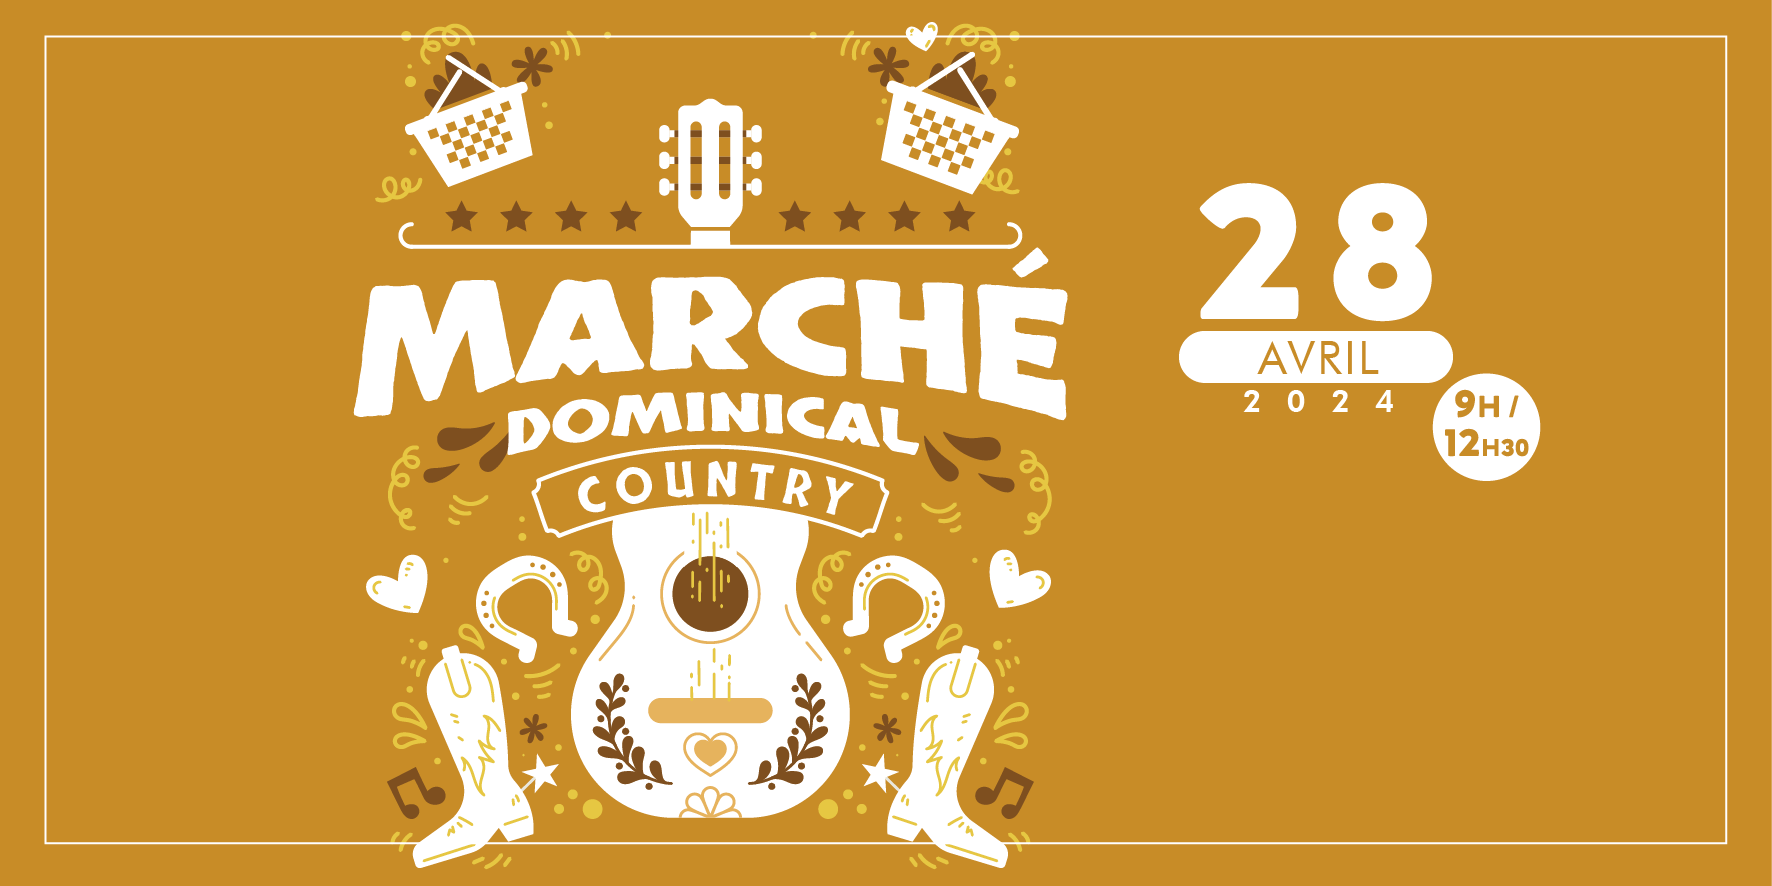 marché dominical country